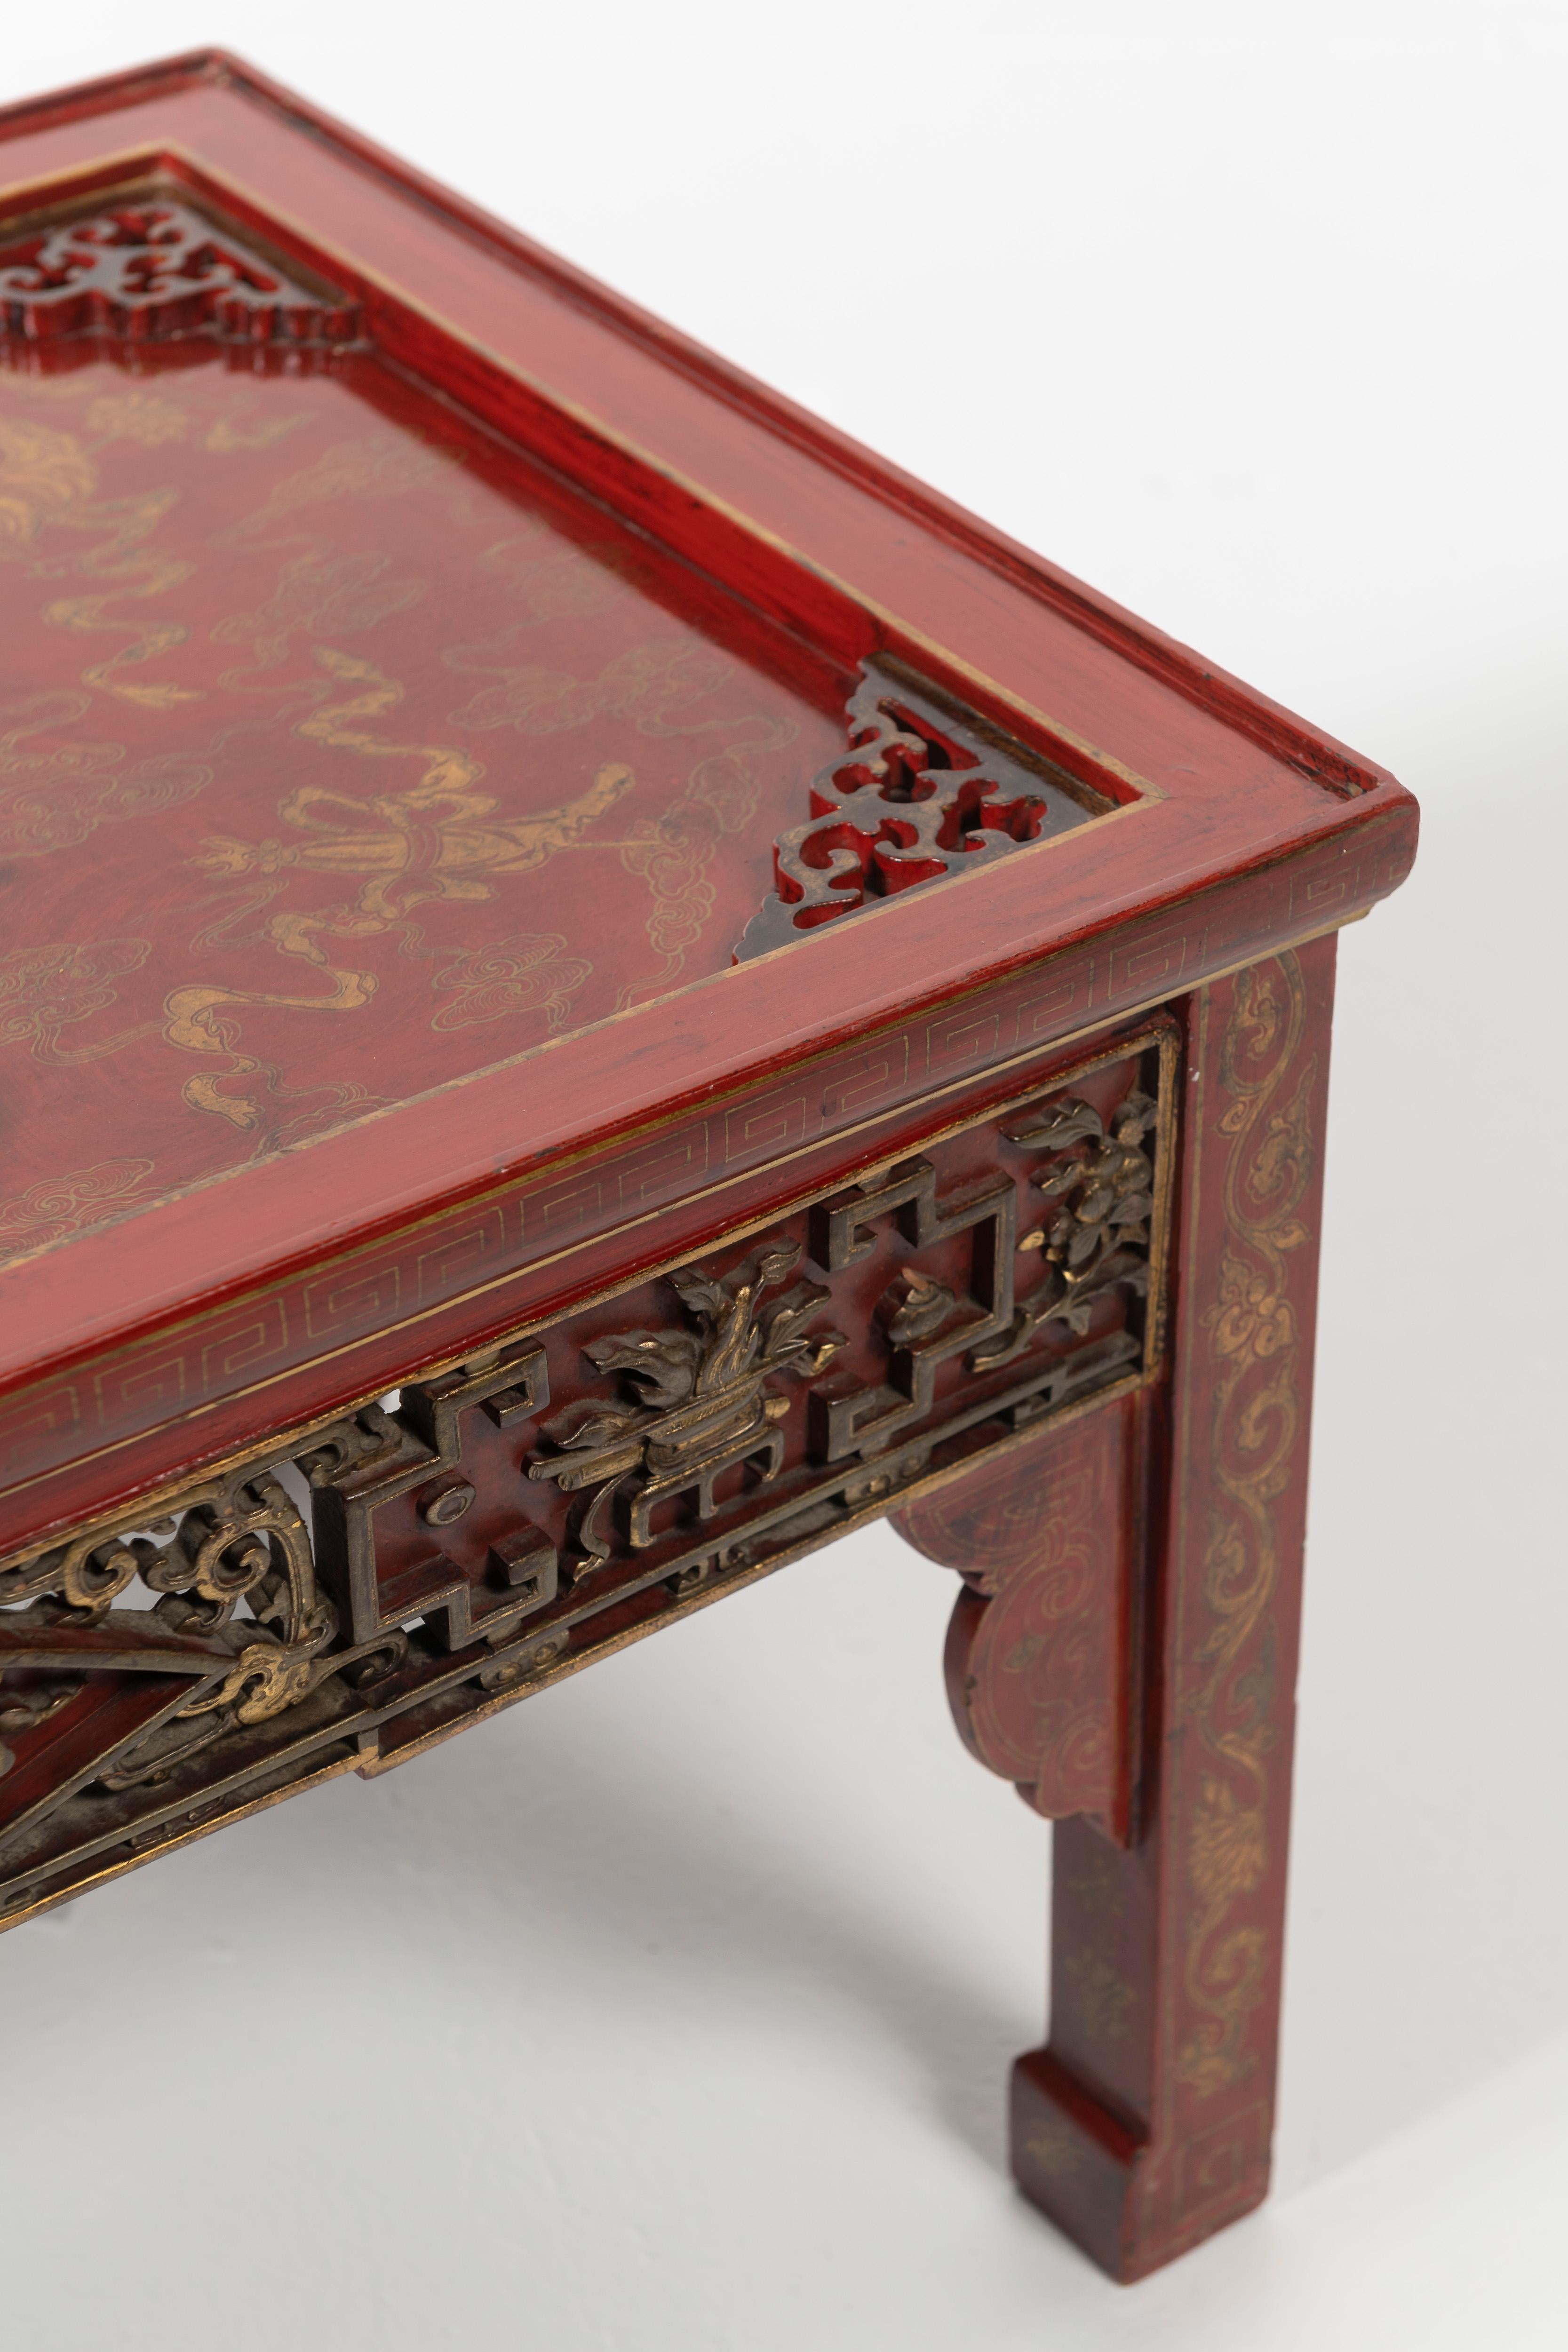 Unique red lacquered chinoiserie coffee table. Beautiful cravings and details, nice scale for most spaces.